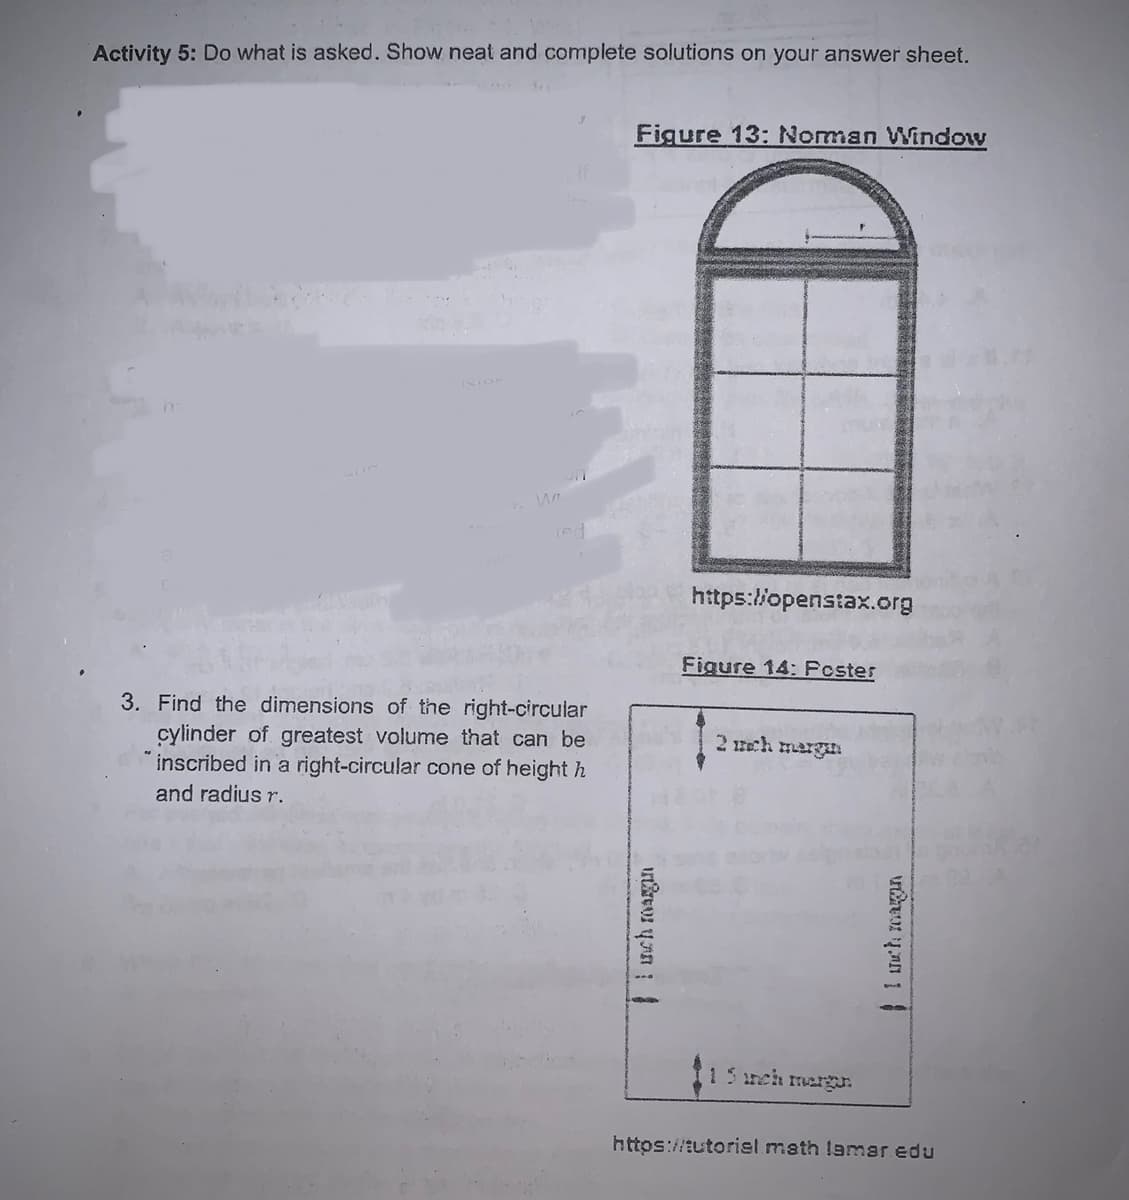 Activity 5: Do what is asked. Show neat and complete solutions on your answer sheet.
Figure 13: Noman Window
https://openstax.org
Figure 14: Pcster
3. Find the dimensions of the right-circular
cylinder of greatest volume that can be
inscribed in a right-circular cone of height h
and radius r.
2 ech margan
15reh mergJ.
https://tutoriel math lamar edu
1 nch magan
